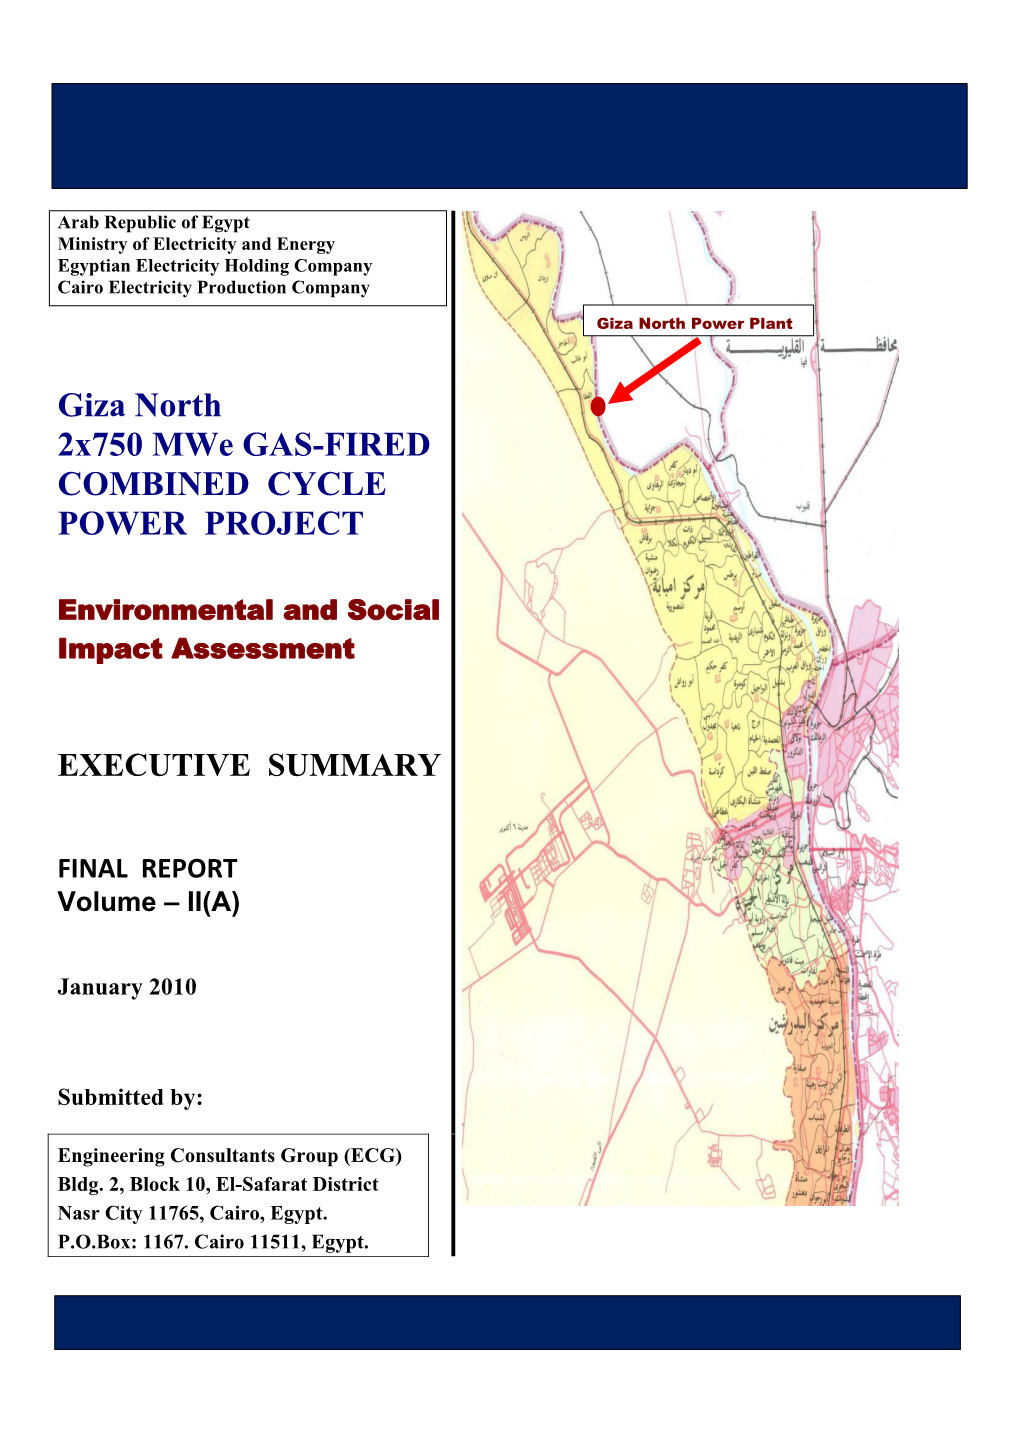 Giza North 2X750 Mwe GAS-FIRED COMBINED CYCLE POWER PROJECT